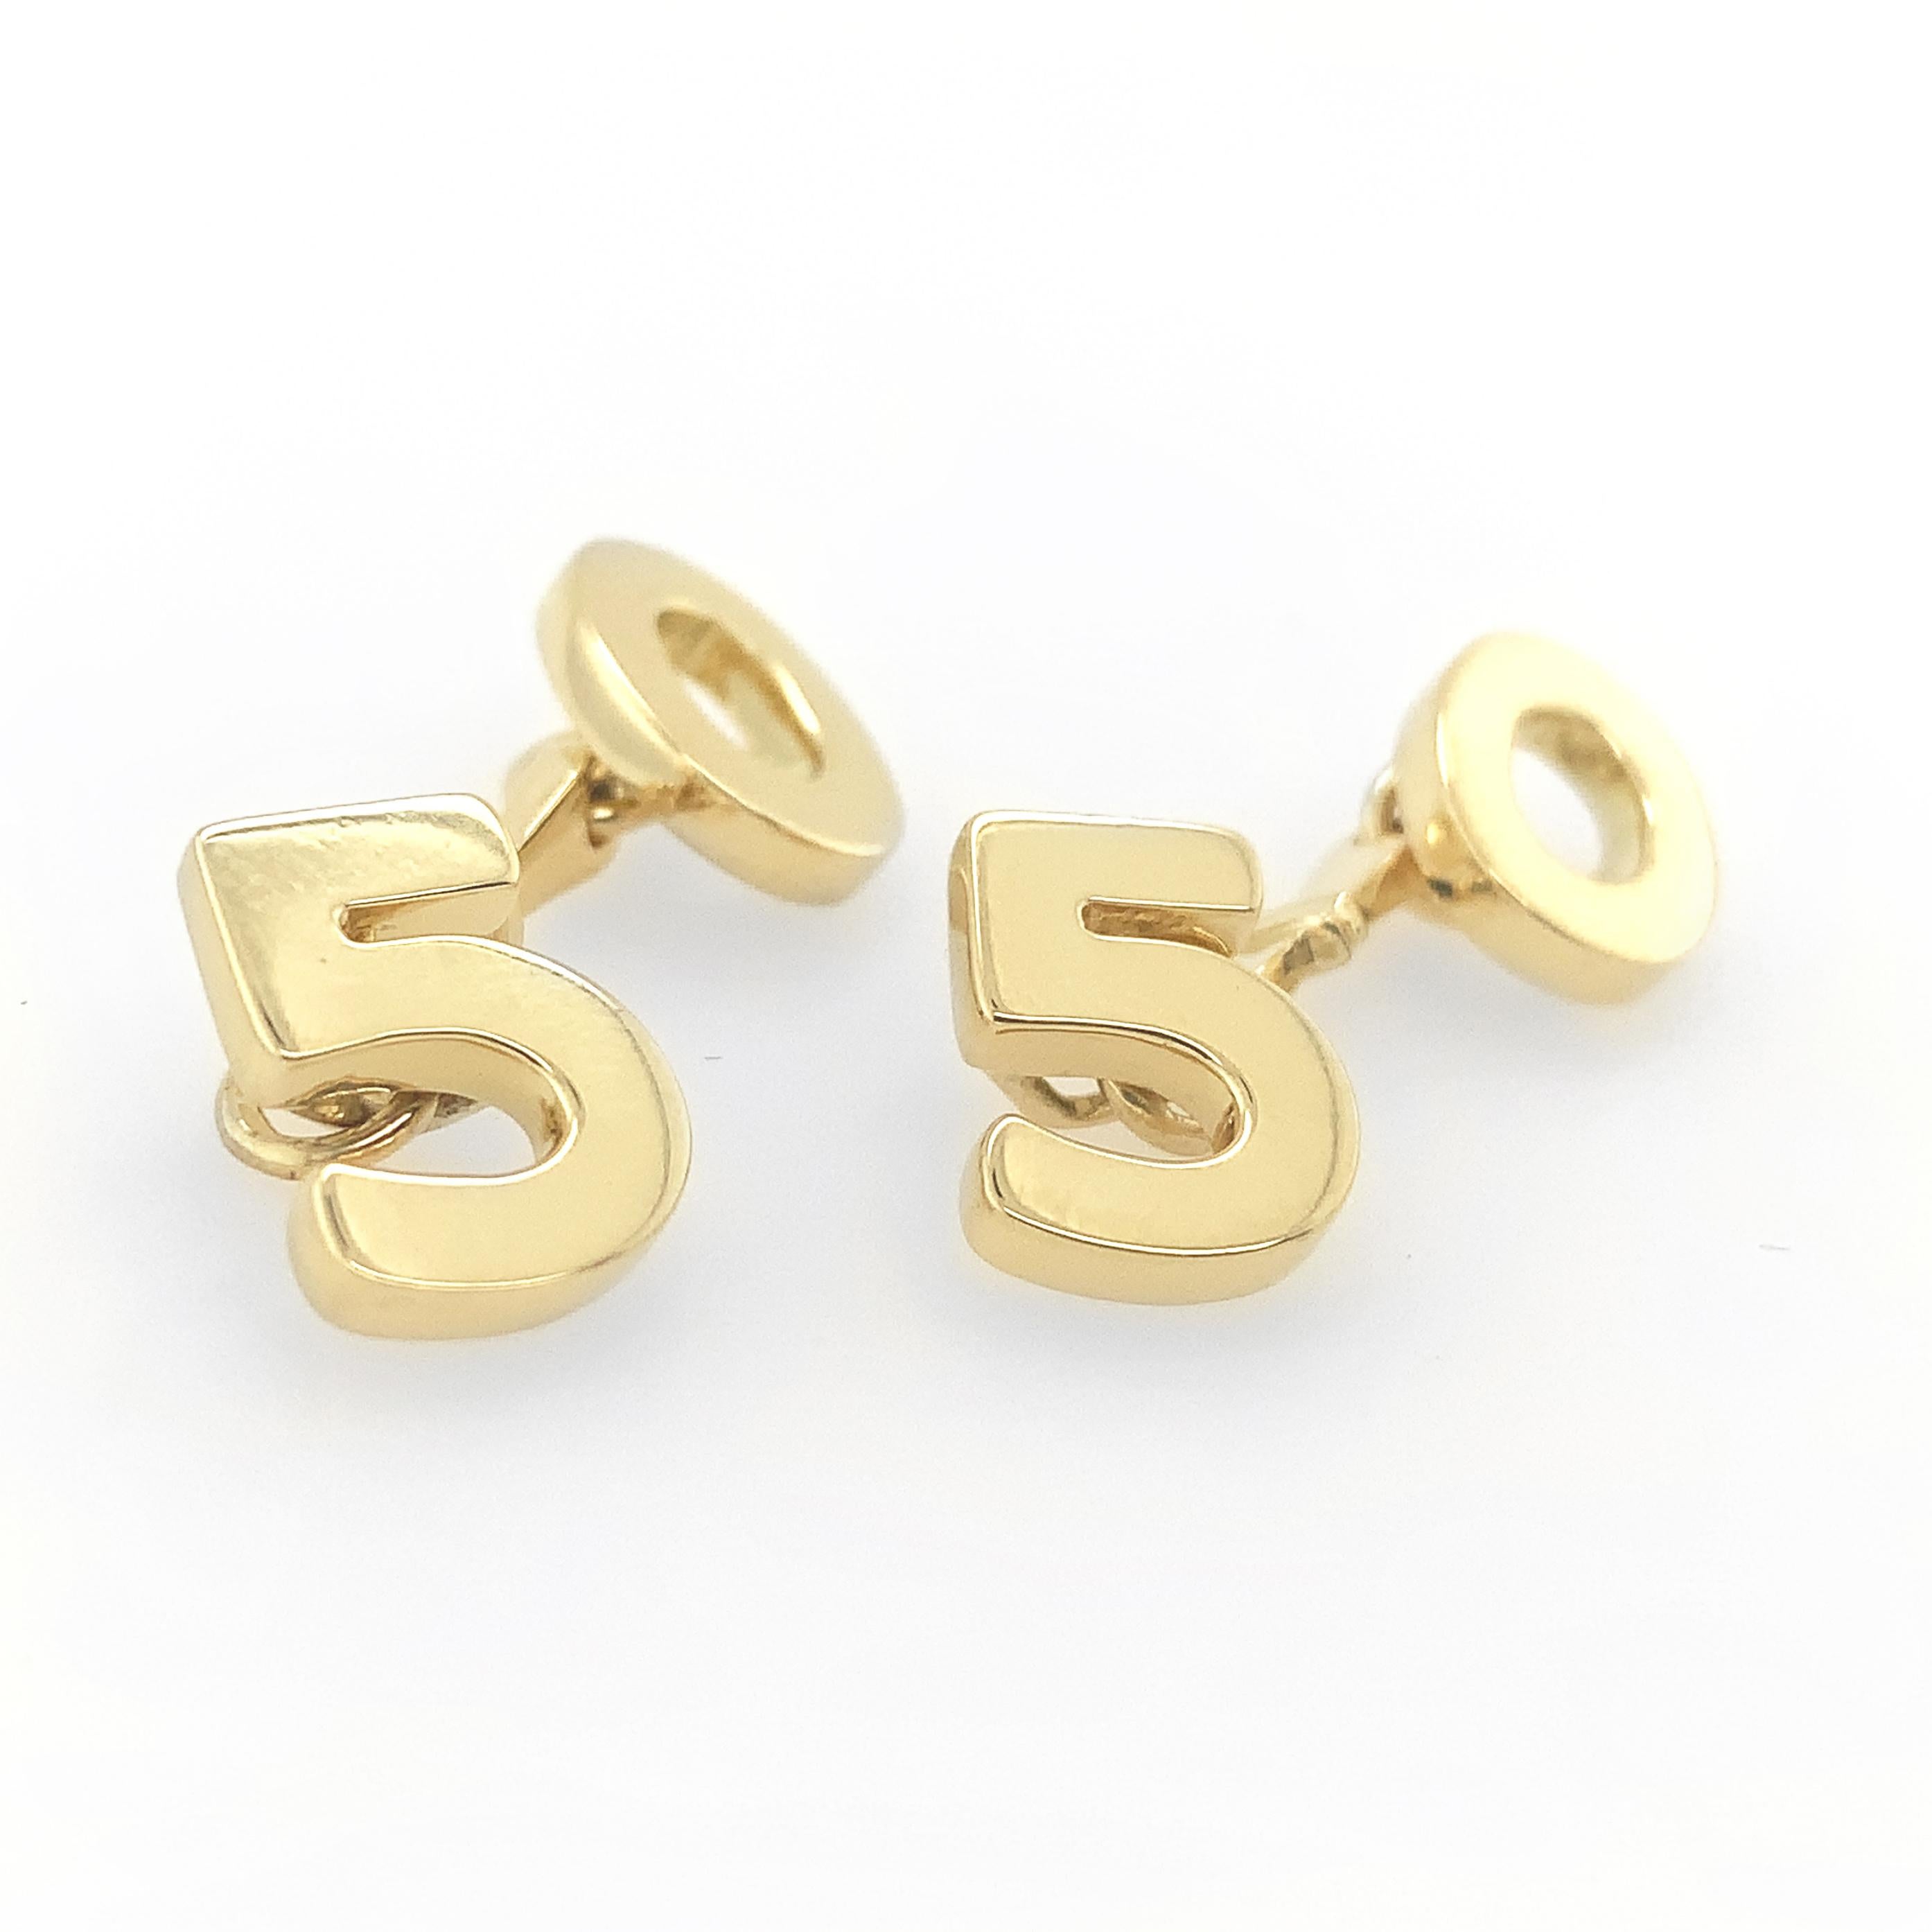 Fabulous double-sided numeral '50' cuff links.  Made and signed by Sabbadini of Milan, Italy, in 18K high polished yellow gold.  Approximately 1